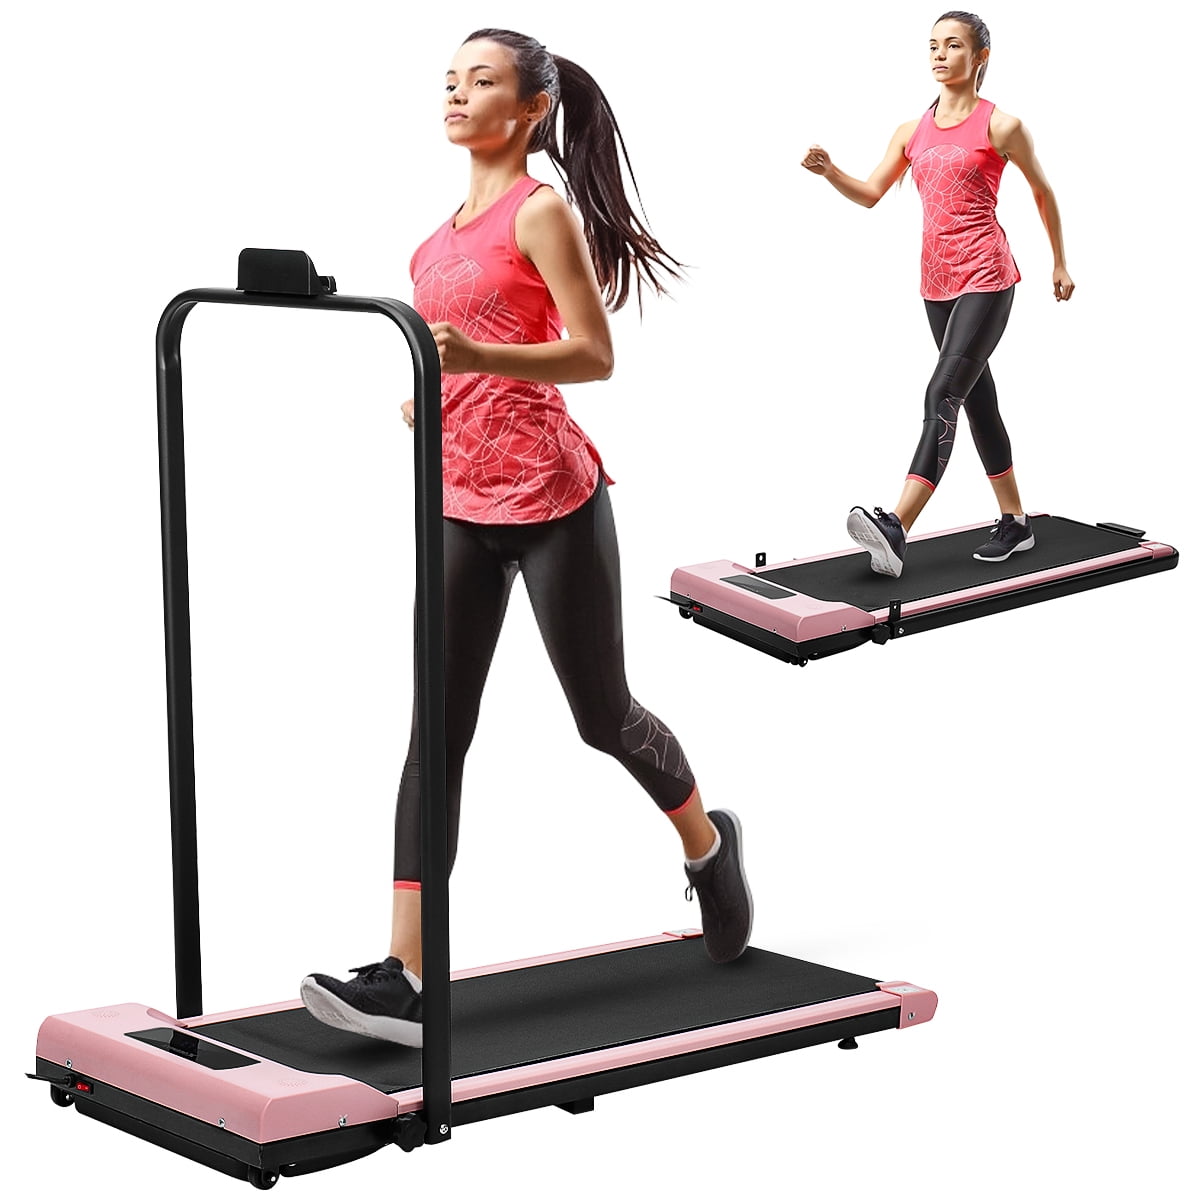 Folding Treadmill Under Desk Electric Treadmill Installation-Free,Walking Jogging Machine for Home/Office Use Motorized Running Machine Treadmill for Home Gym 